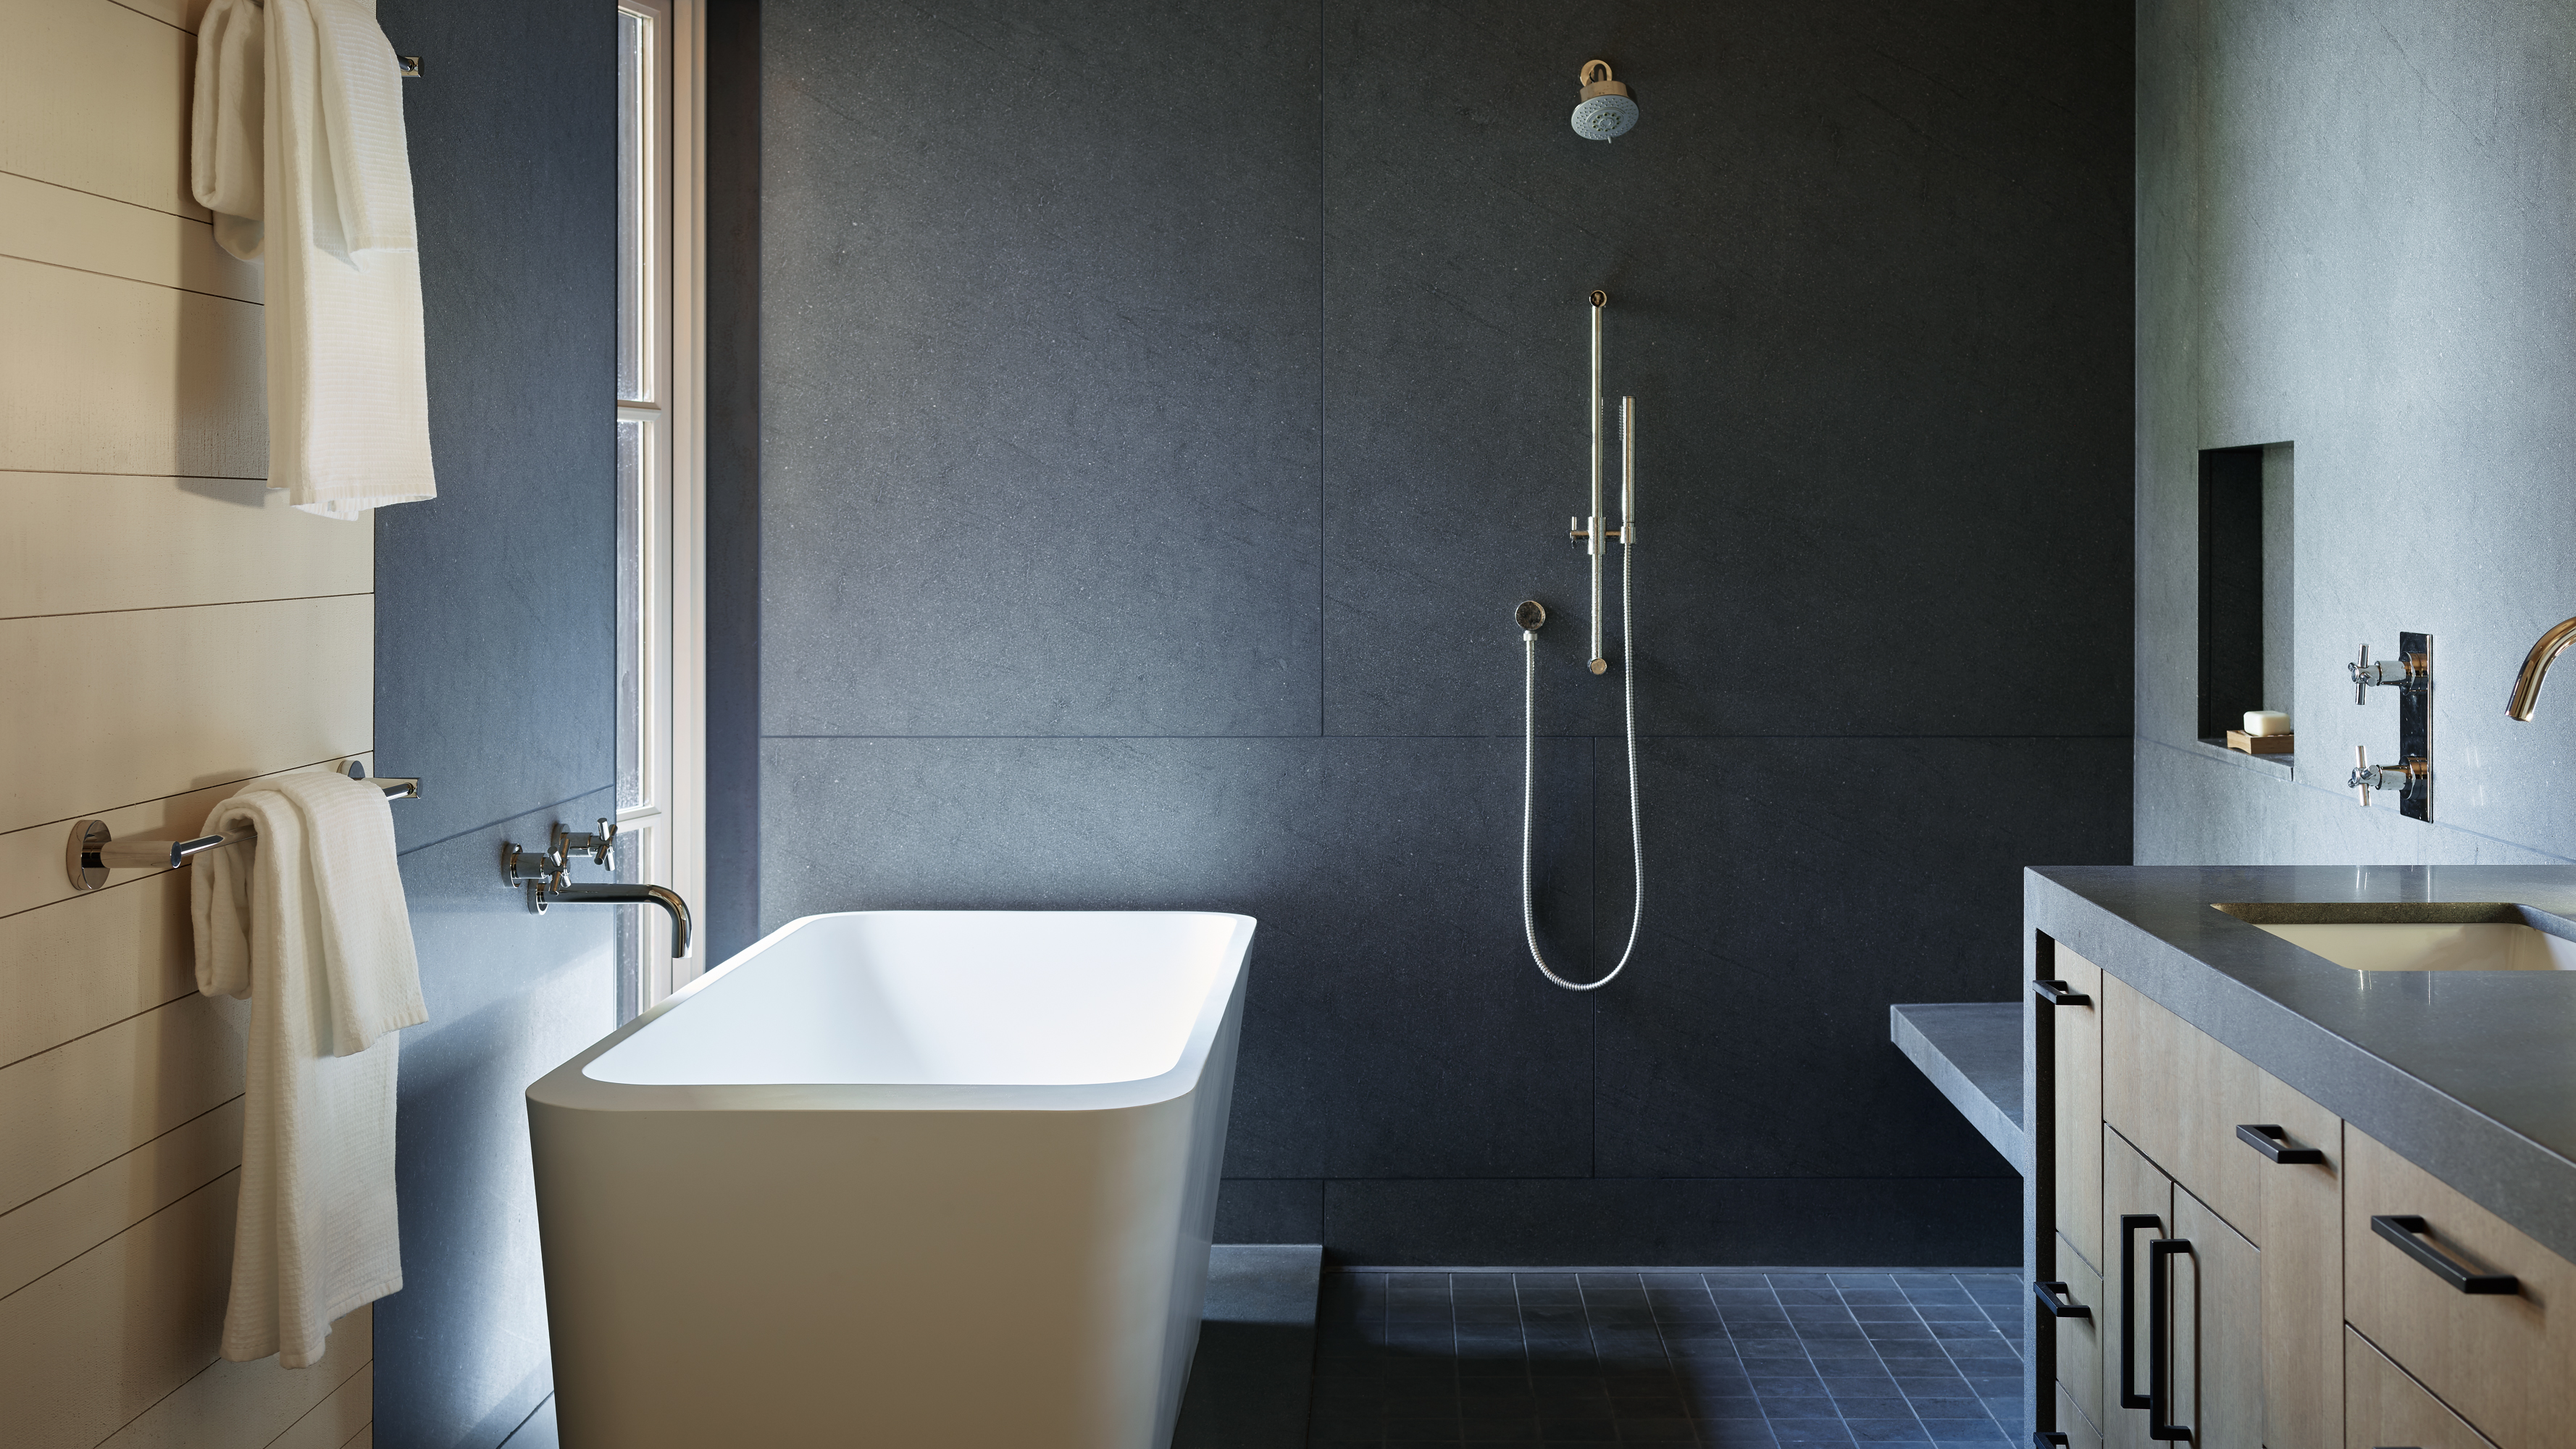 The deep gray, minimal, and sleek bathroom occupies the stone bar at the rear of the house. It projects beyond to offer a view of the water from the bath and shower.